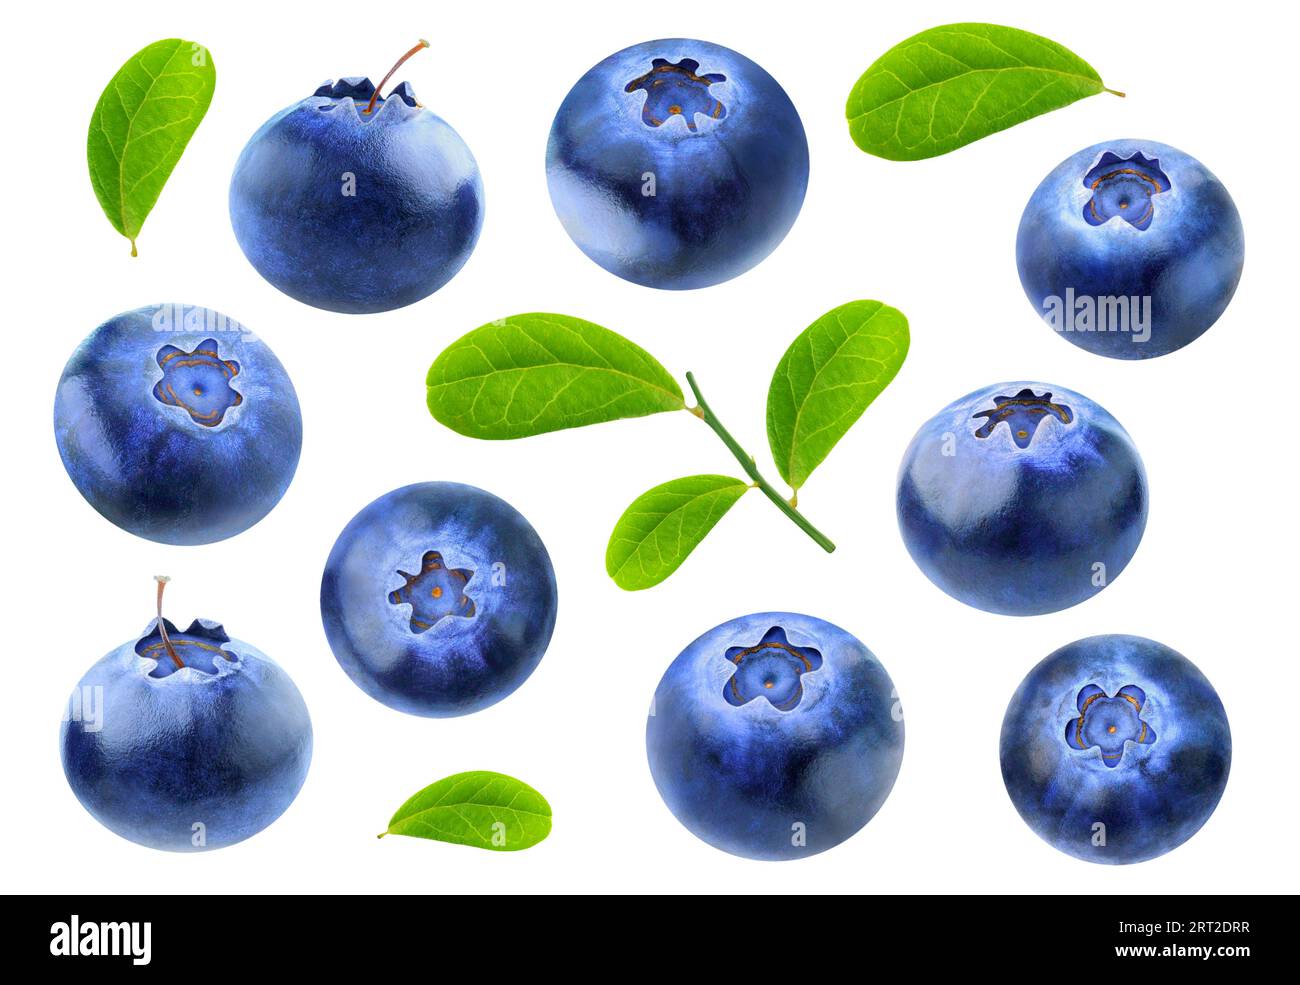 Isolated collection of blueberry fruits with leaves isolated on white background Stock Photo